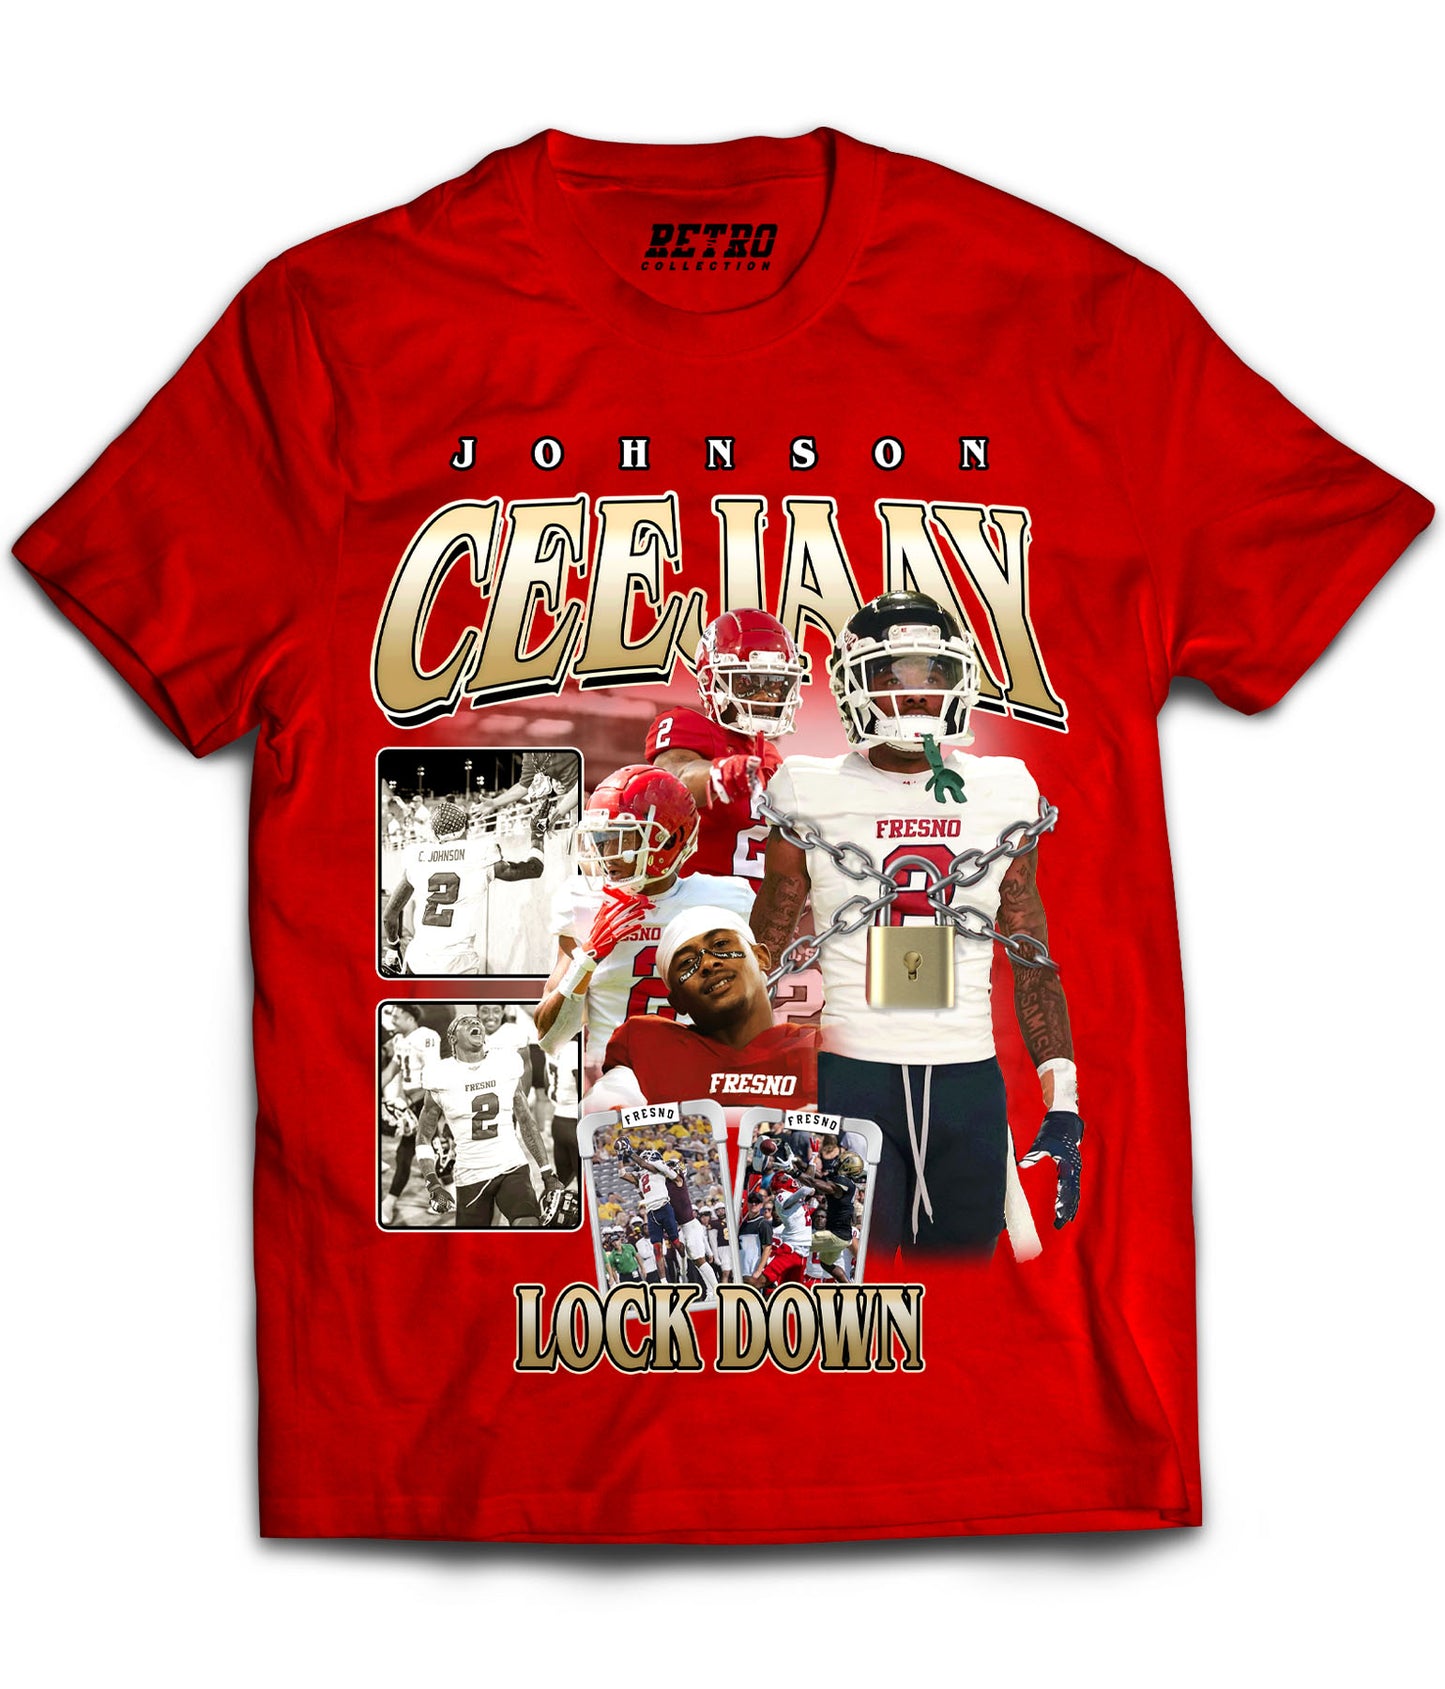 Ceejaay "Lock Down" Johnson Tribute Shirt *LIMITED EDITION* (Black, Red, White)